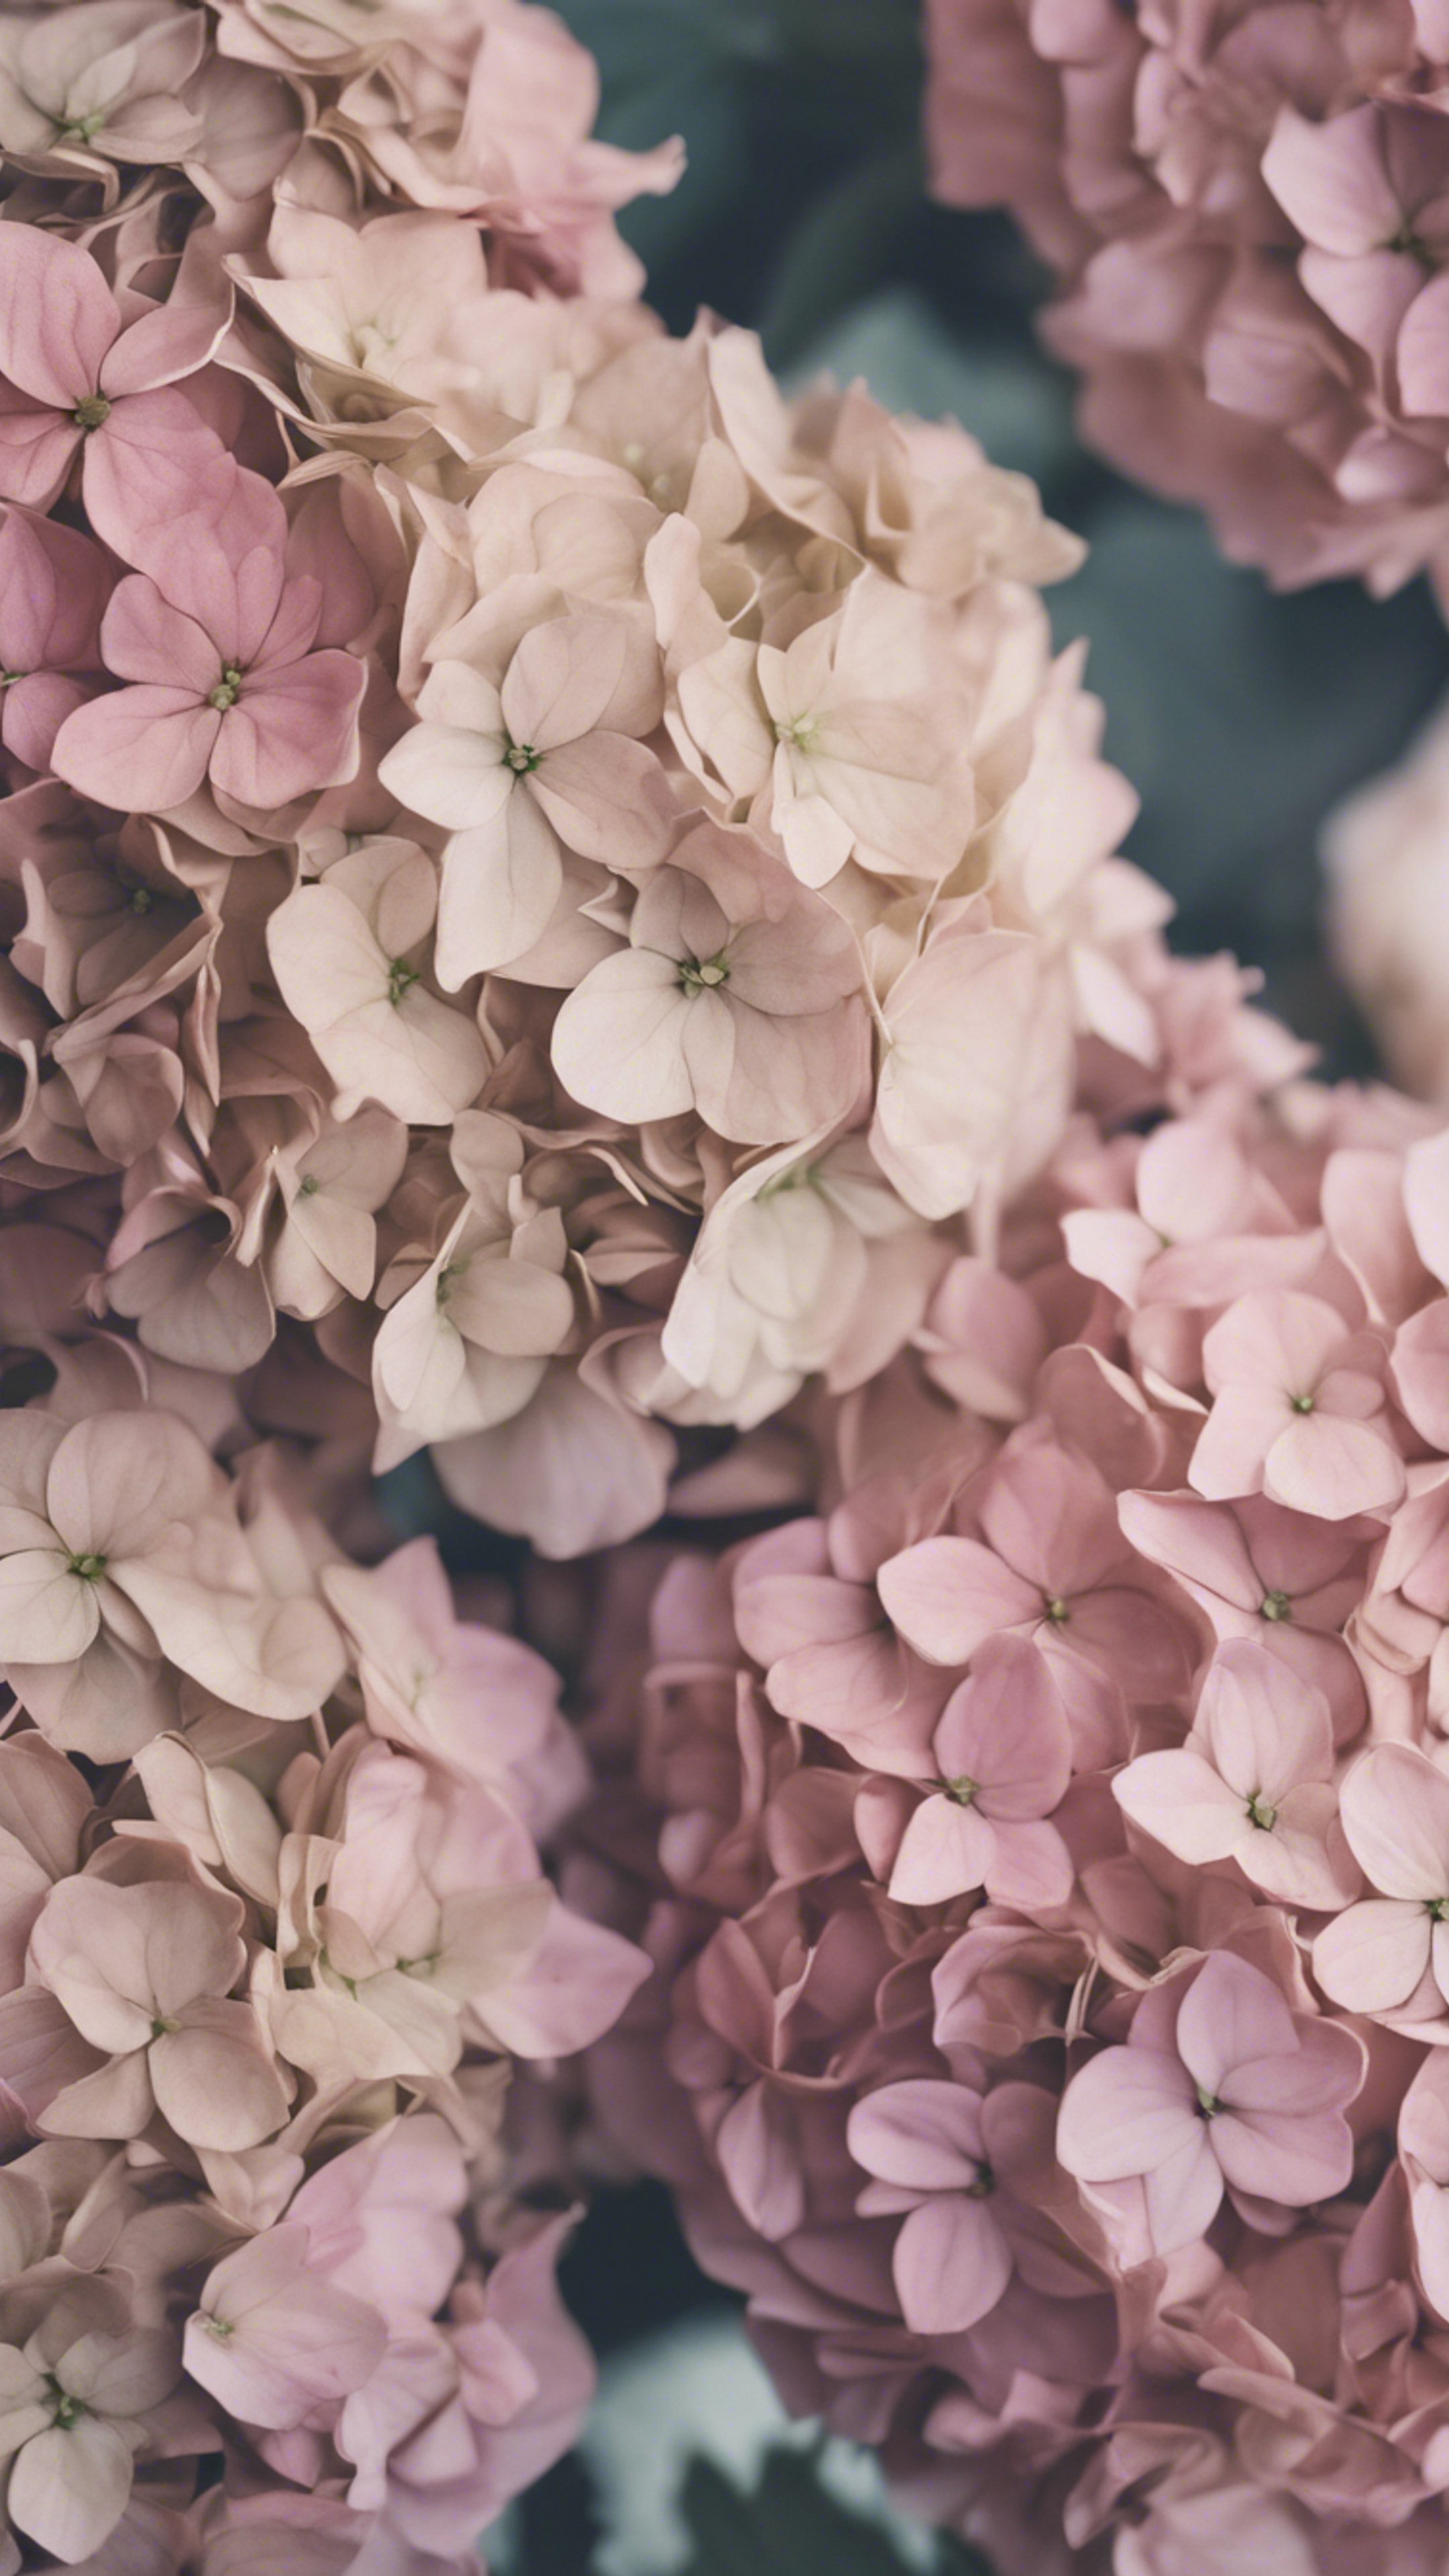 An antique floral pattern with delicate hydrangeas in a hue of vintage pink. 벽지[d61dab8ff010416797b3]